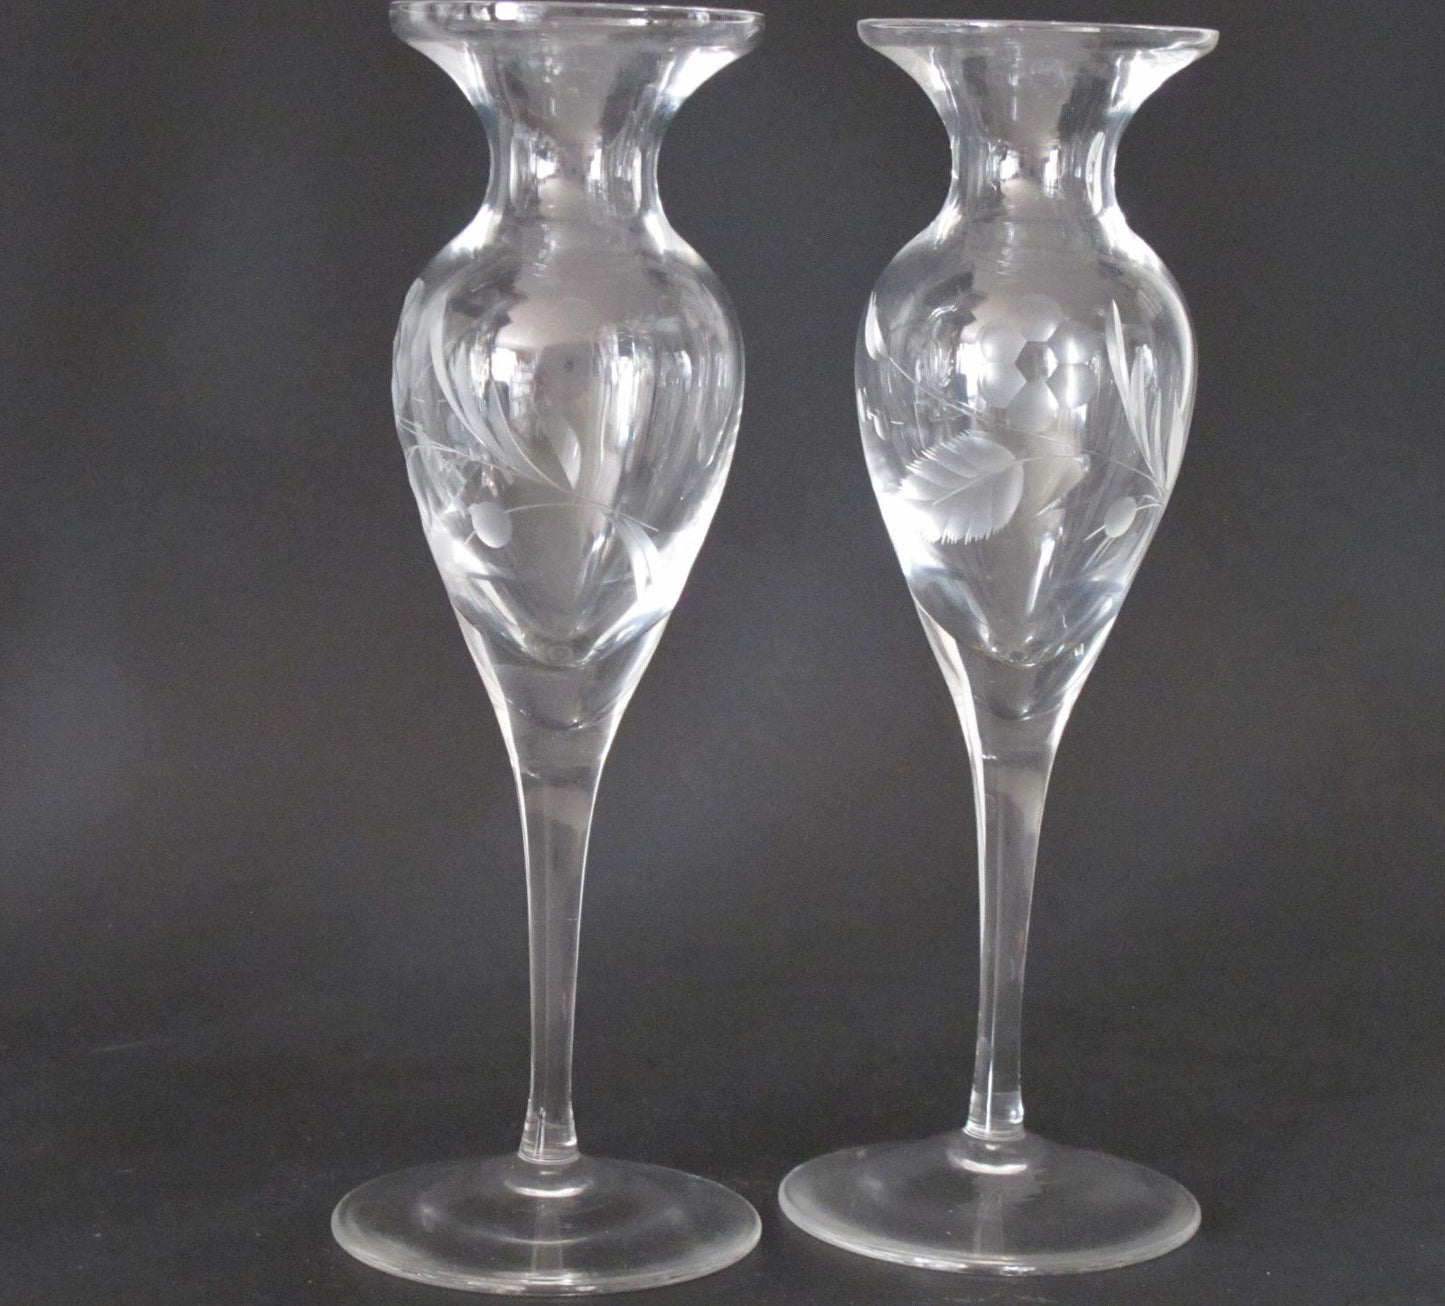 Lenox HAND Cut glass bouquet candle sticks Pair Crystal  Made in USA - O'Rourke crystal awards & gifts abp cut glass